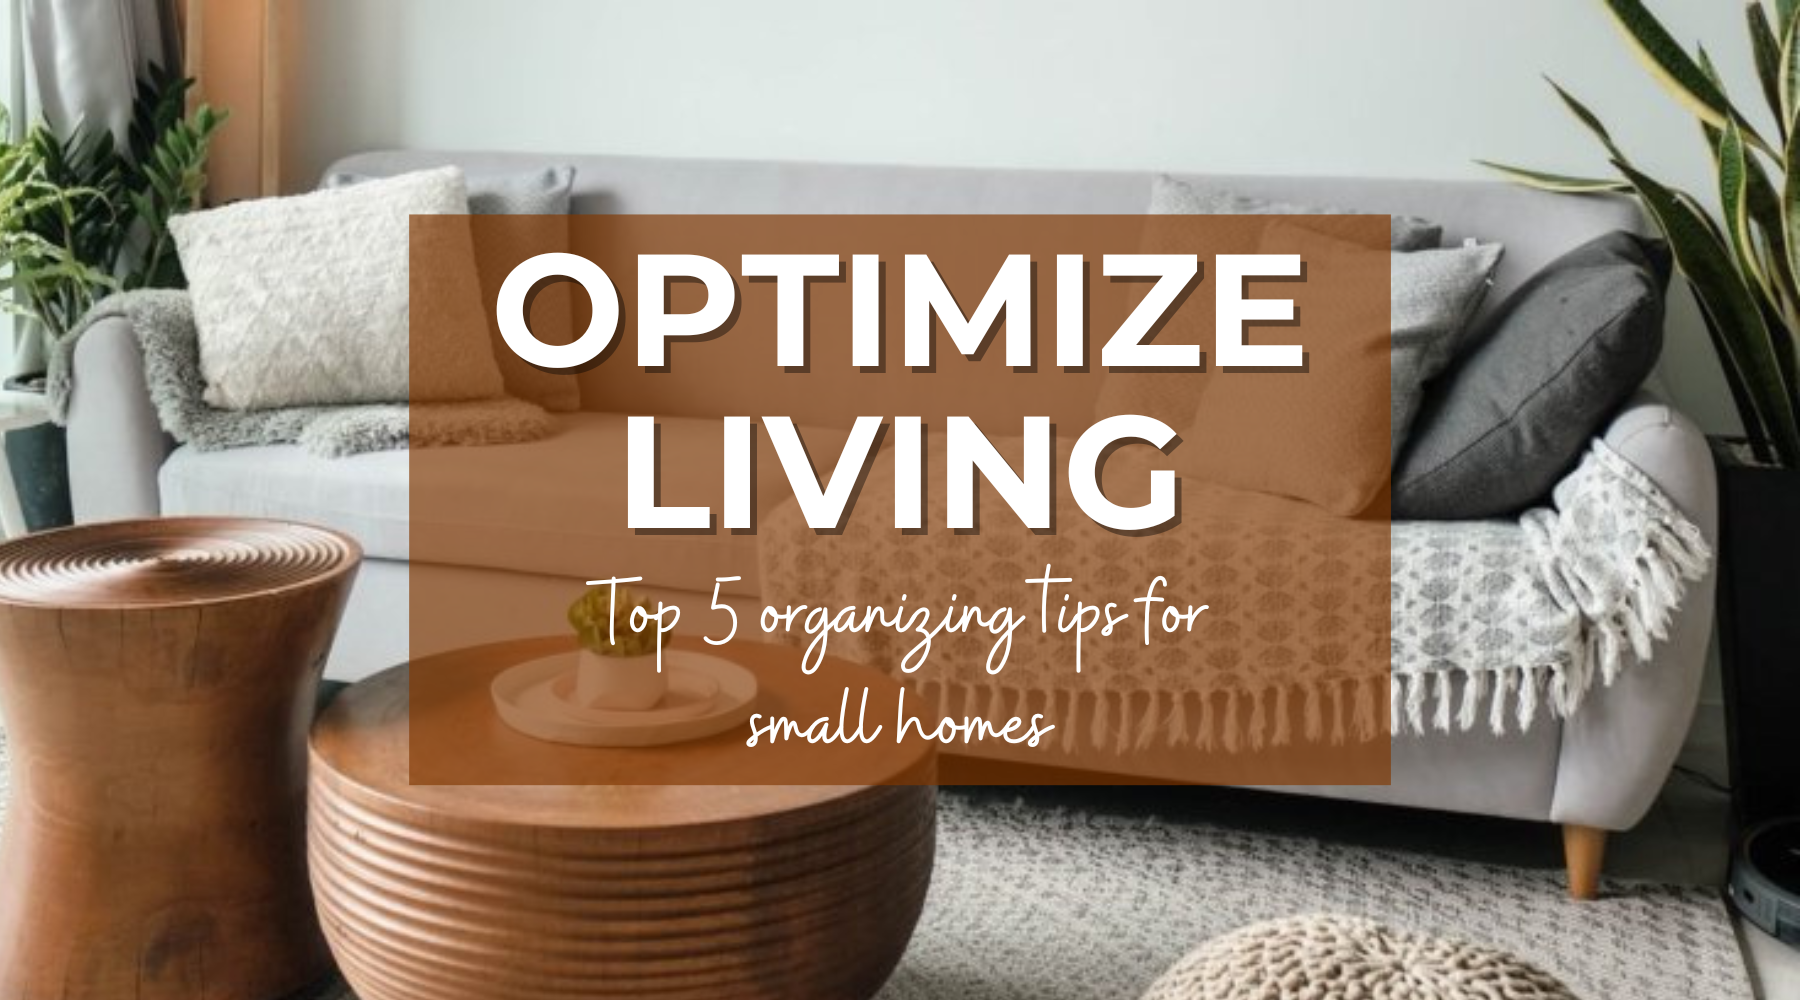 Optimize Living: Top 5 Organizing Tips for Small Homes